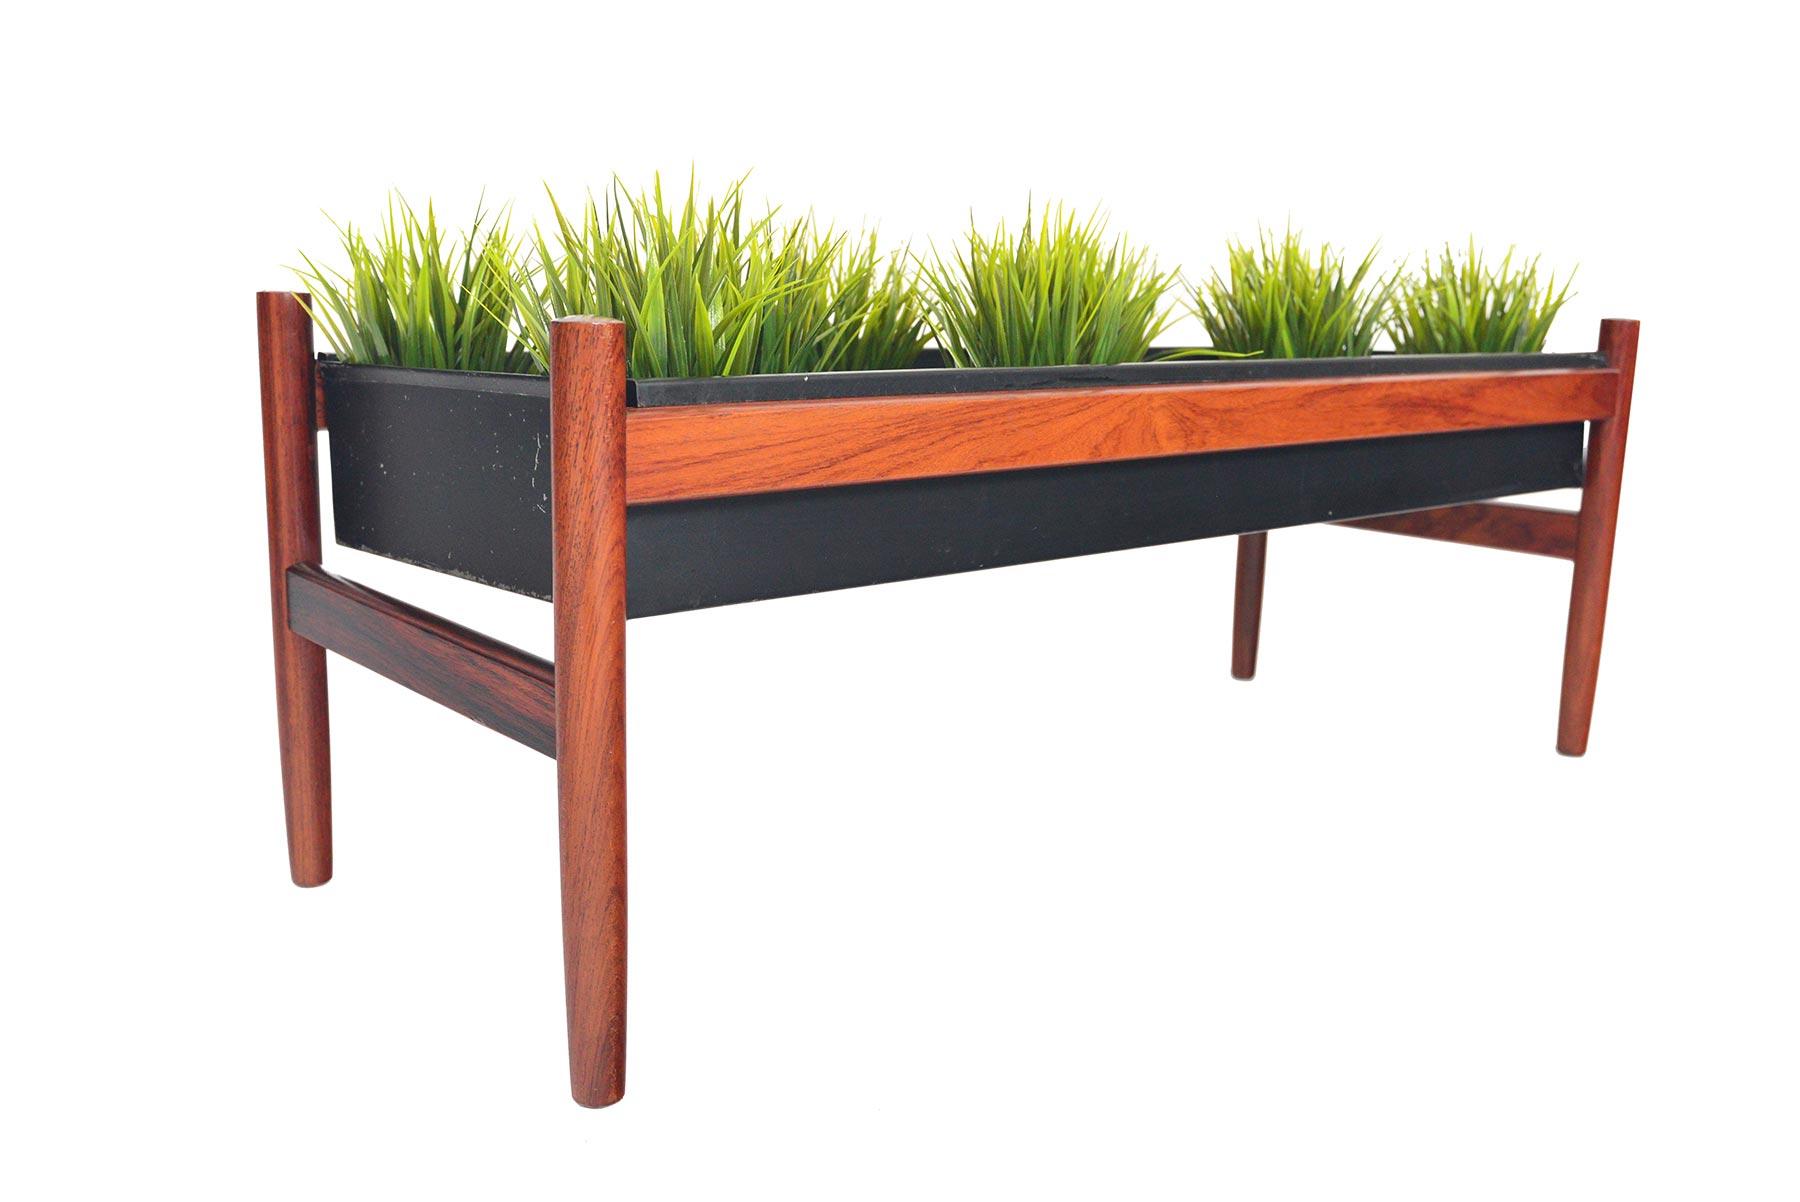 This long Danish modern planter is framed in Brazilian rosewood and holds an original black painted zinc liner. In excellent original condition.

